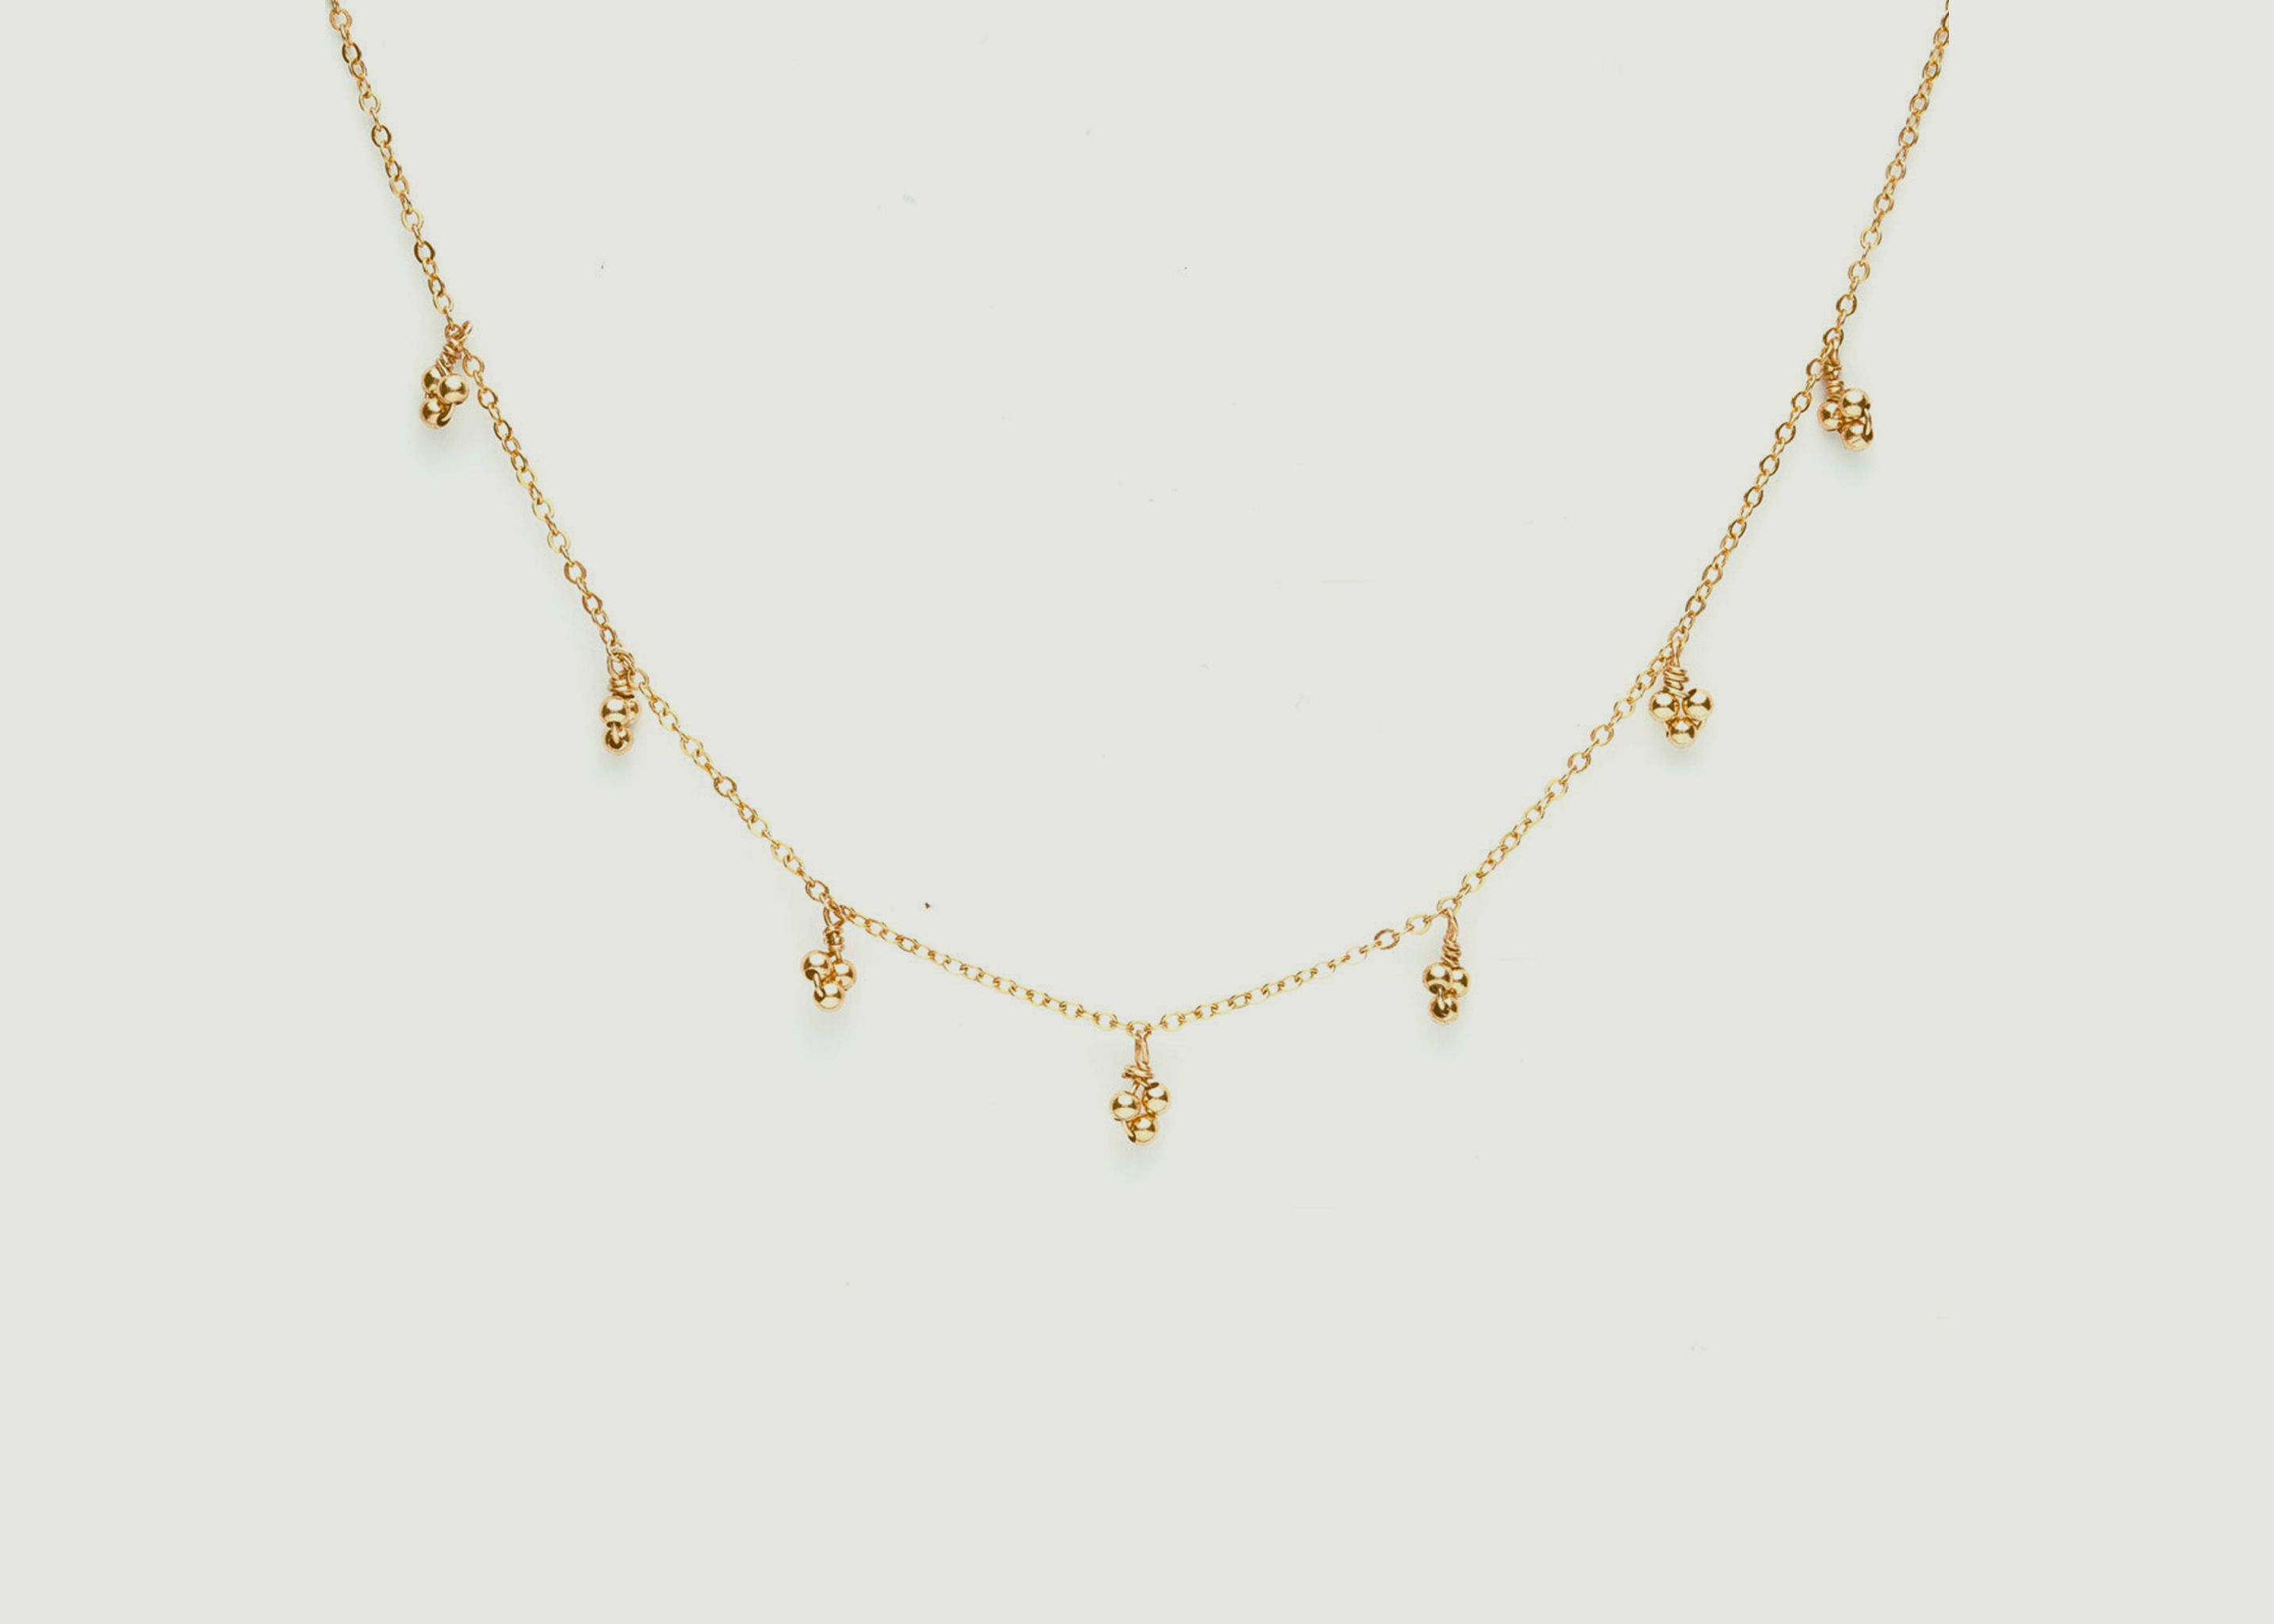 Grelots gold filled necklace - YAY